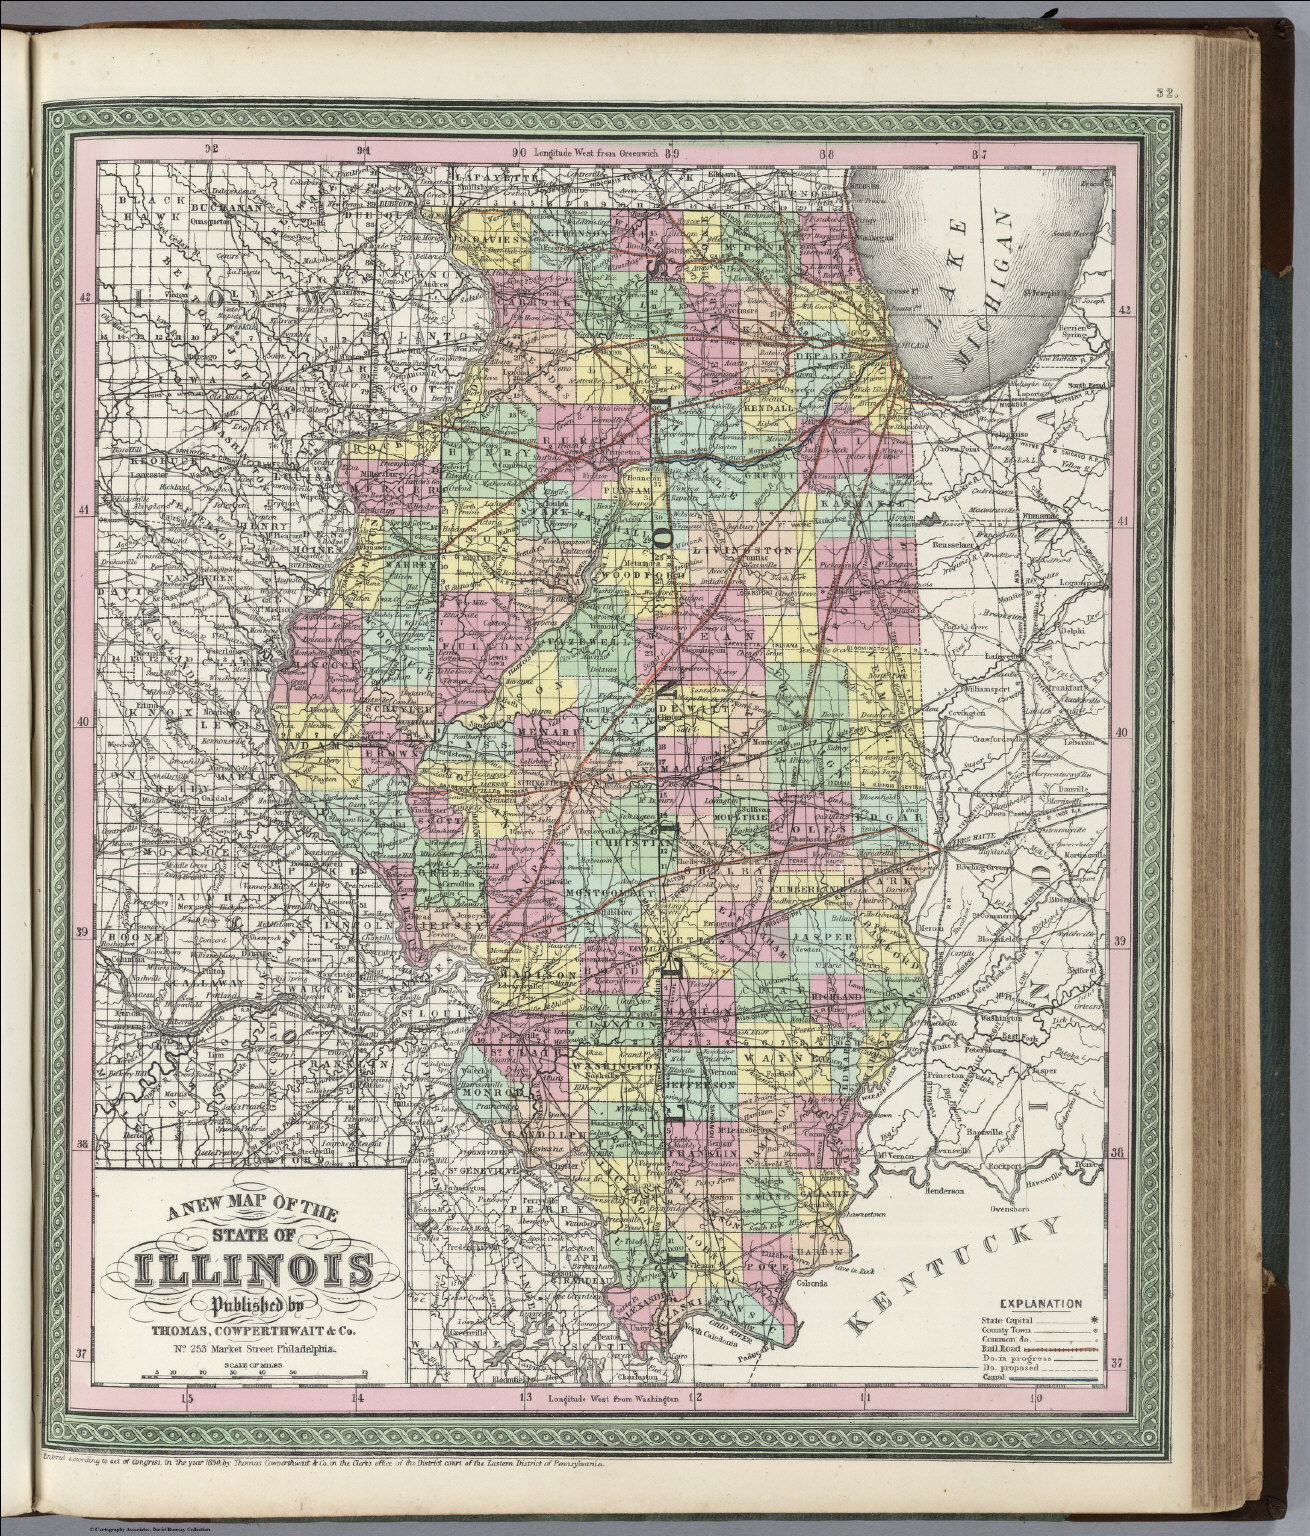 A New Map Of The State Of Illinois David Rumsey Historical Map Collection 7820